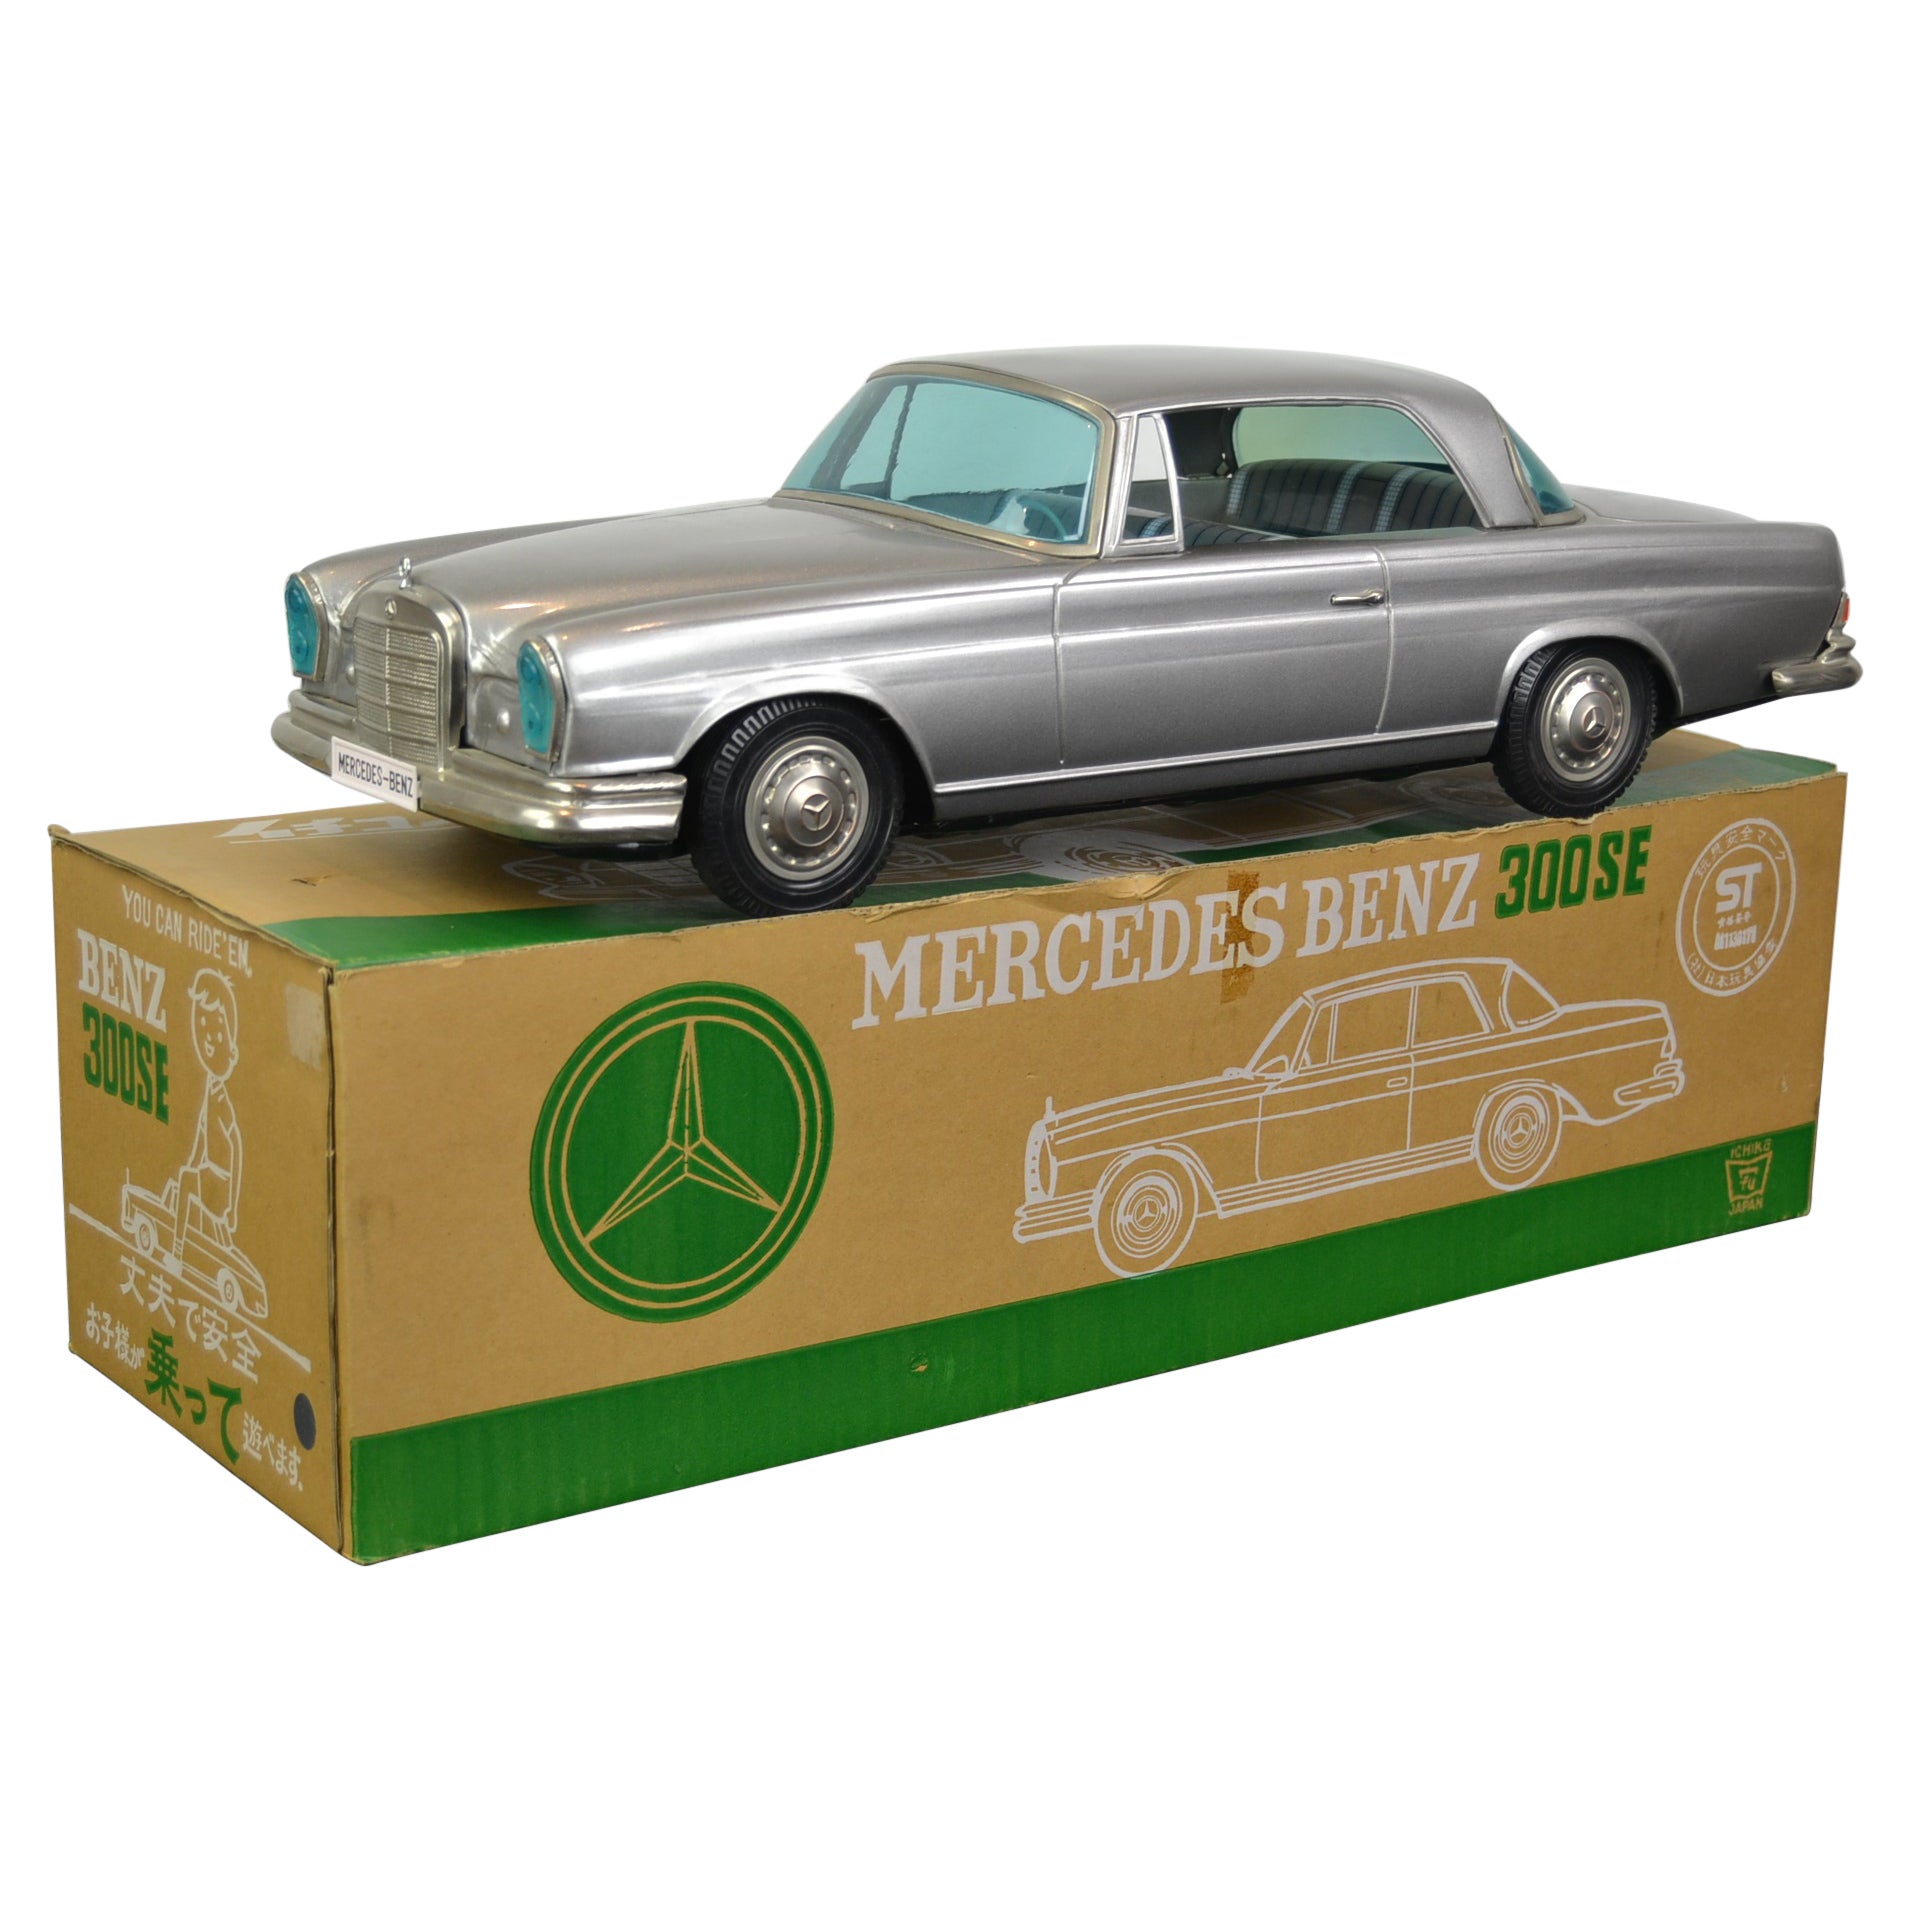 Boxed Mercedes Benz 300 SE Toy Model by Ichiko Japan, 1980s